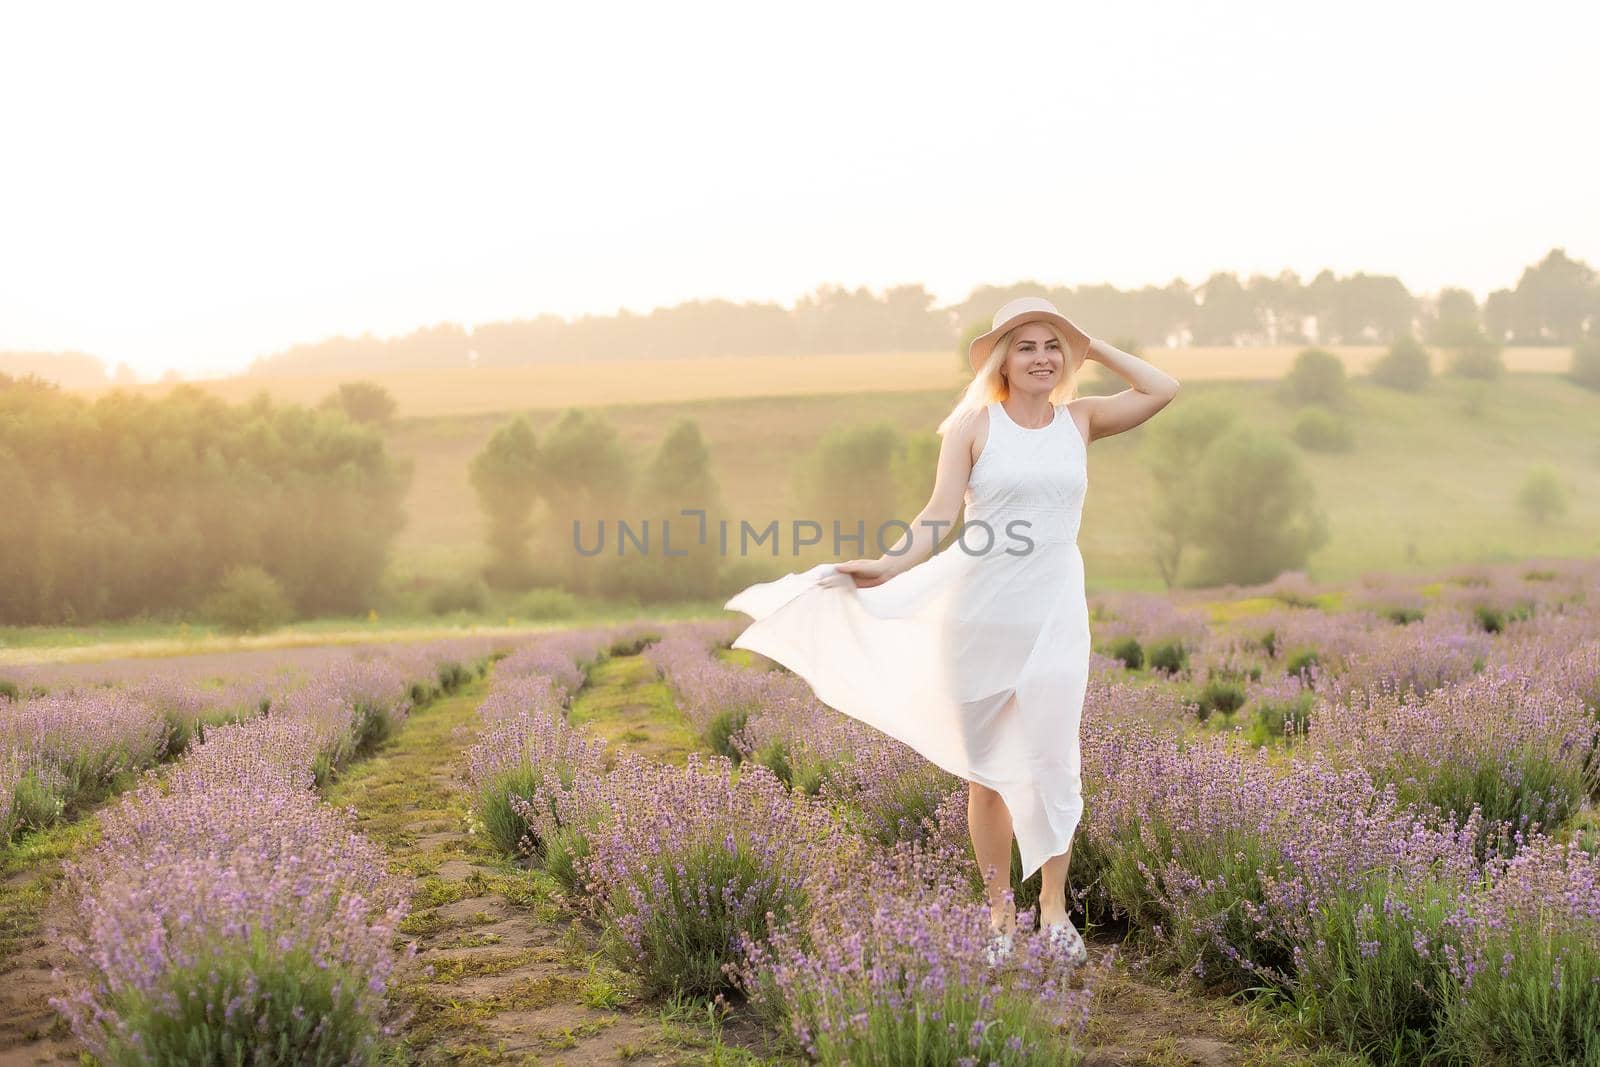 Beautiful young woman walking the field of lavender. Fashion outfit dress, straw hat. by Andelov13